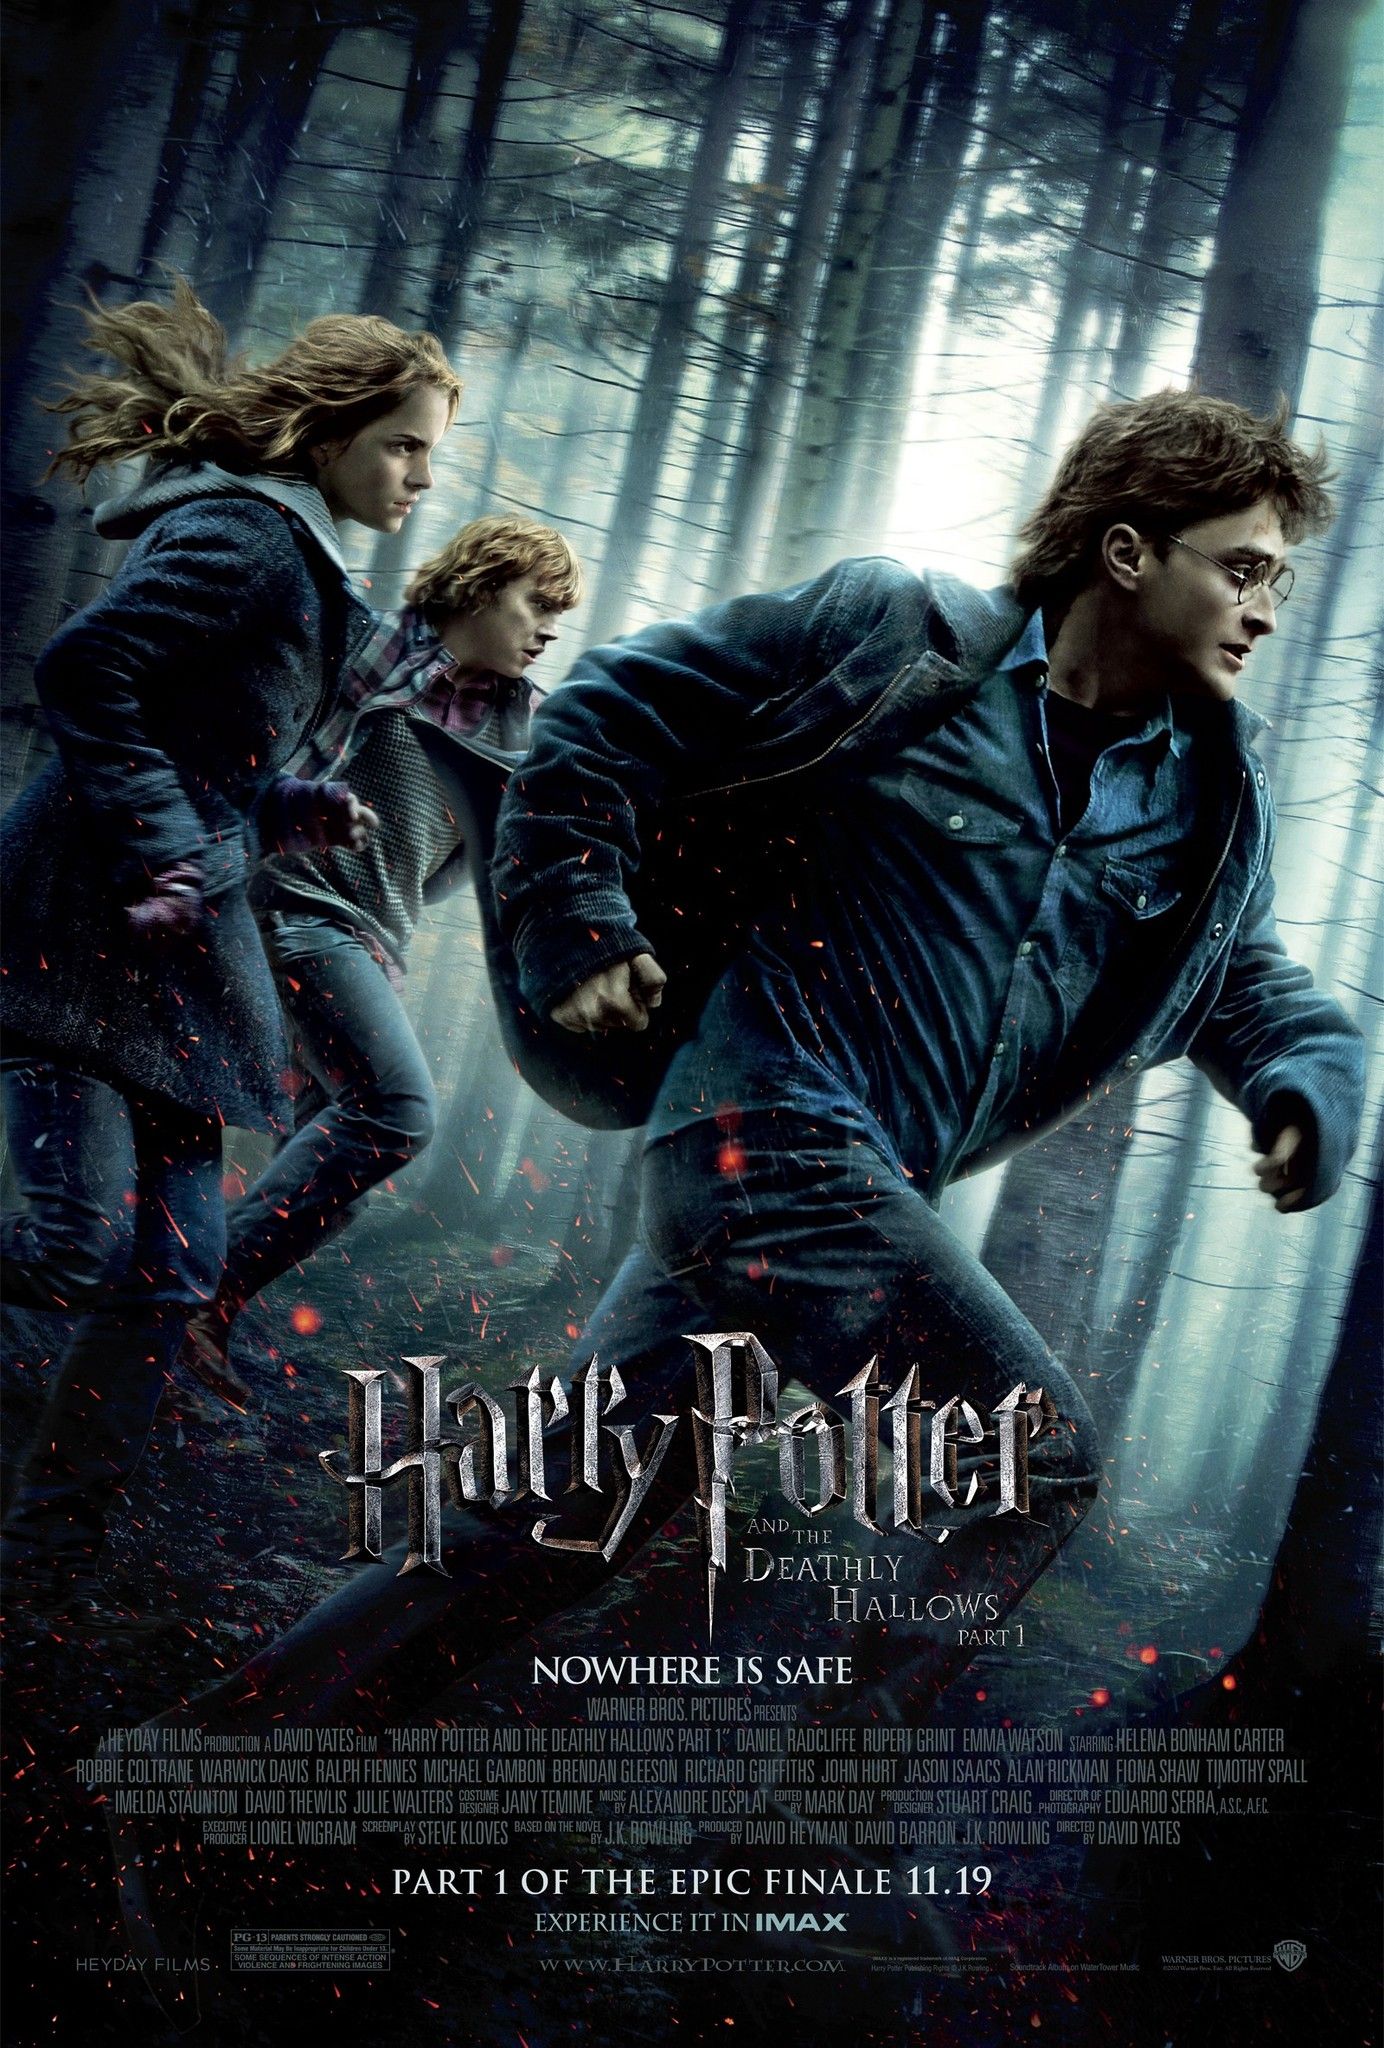 All Harry Potter Movies Ranked from Worst to Best